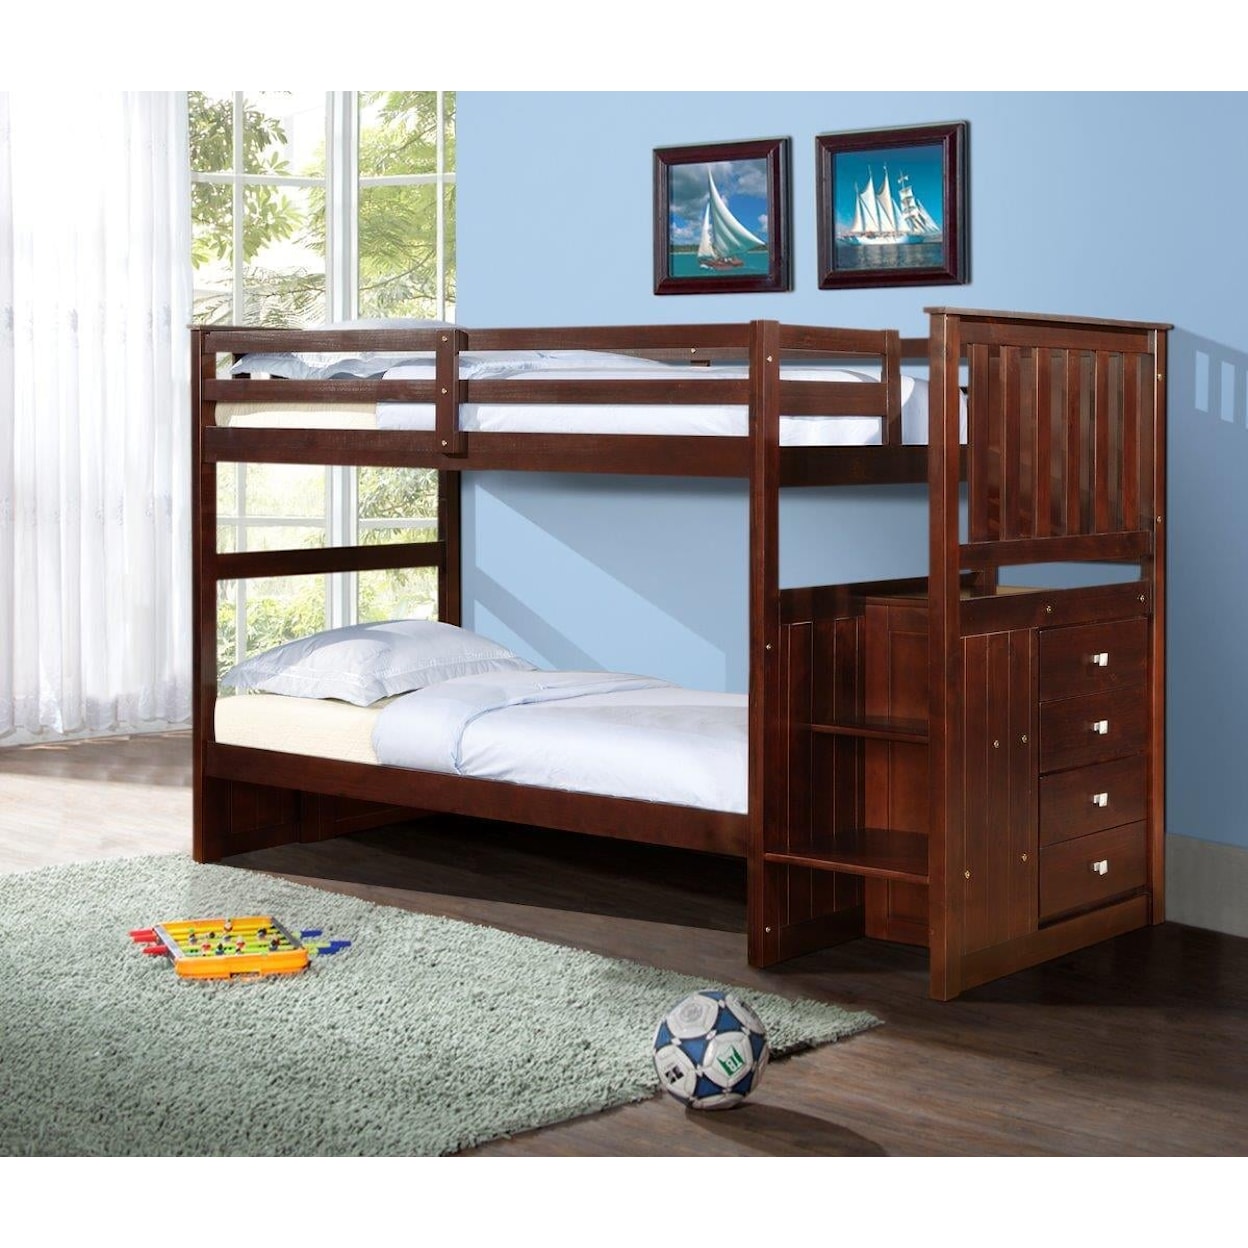 Donco Trading Co Bunkbeds ARCHIE CAPPUCCINO TWIN/TWIN | STAIRWAY BUNKB